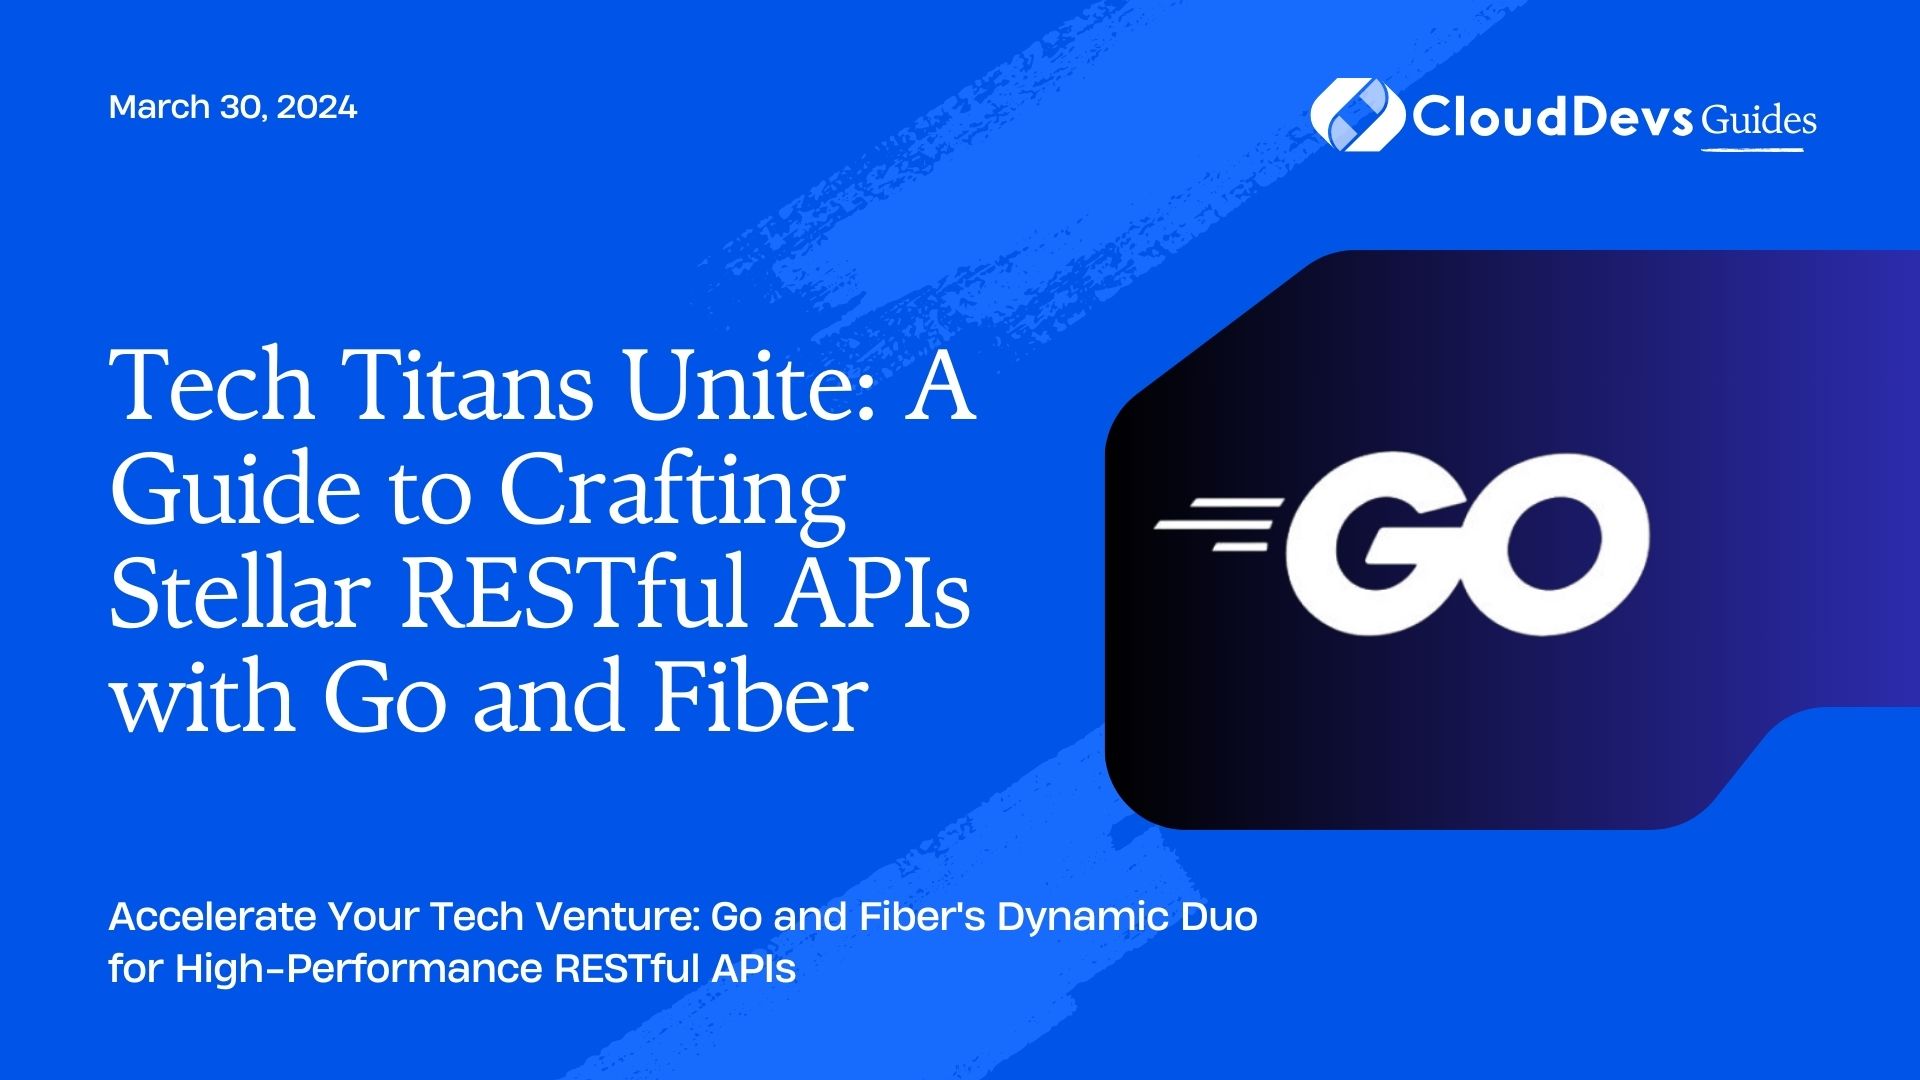 Tech Titans Unite: A Guide to Crafting Stellar RESTful APIs with Go and Fiber